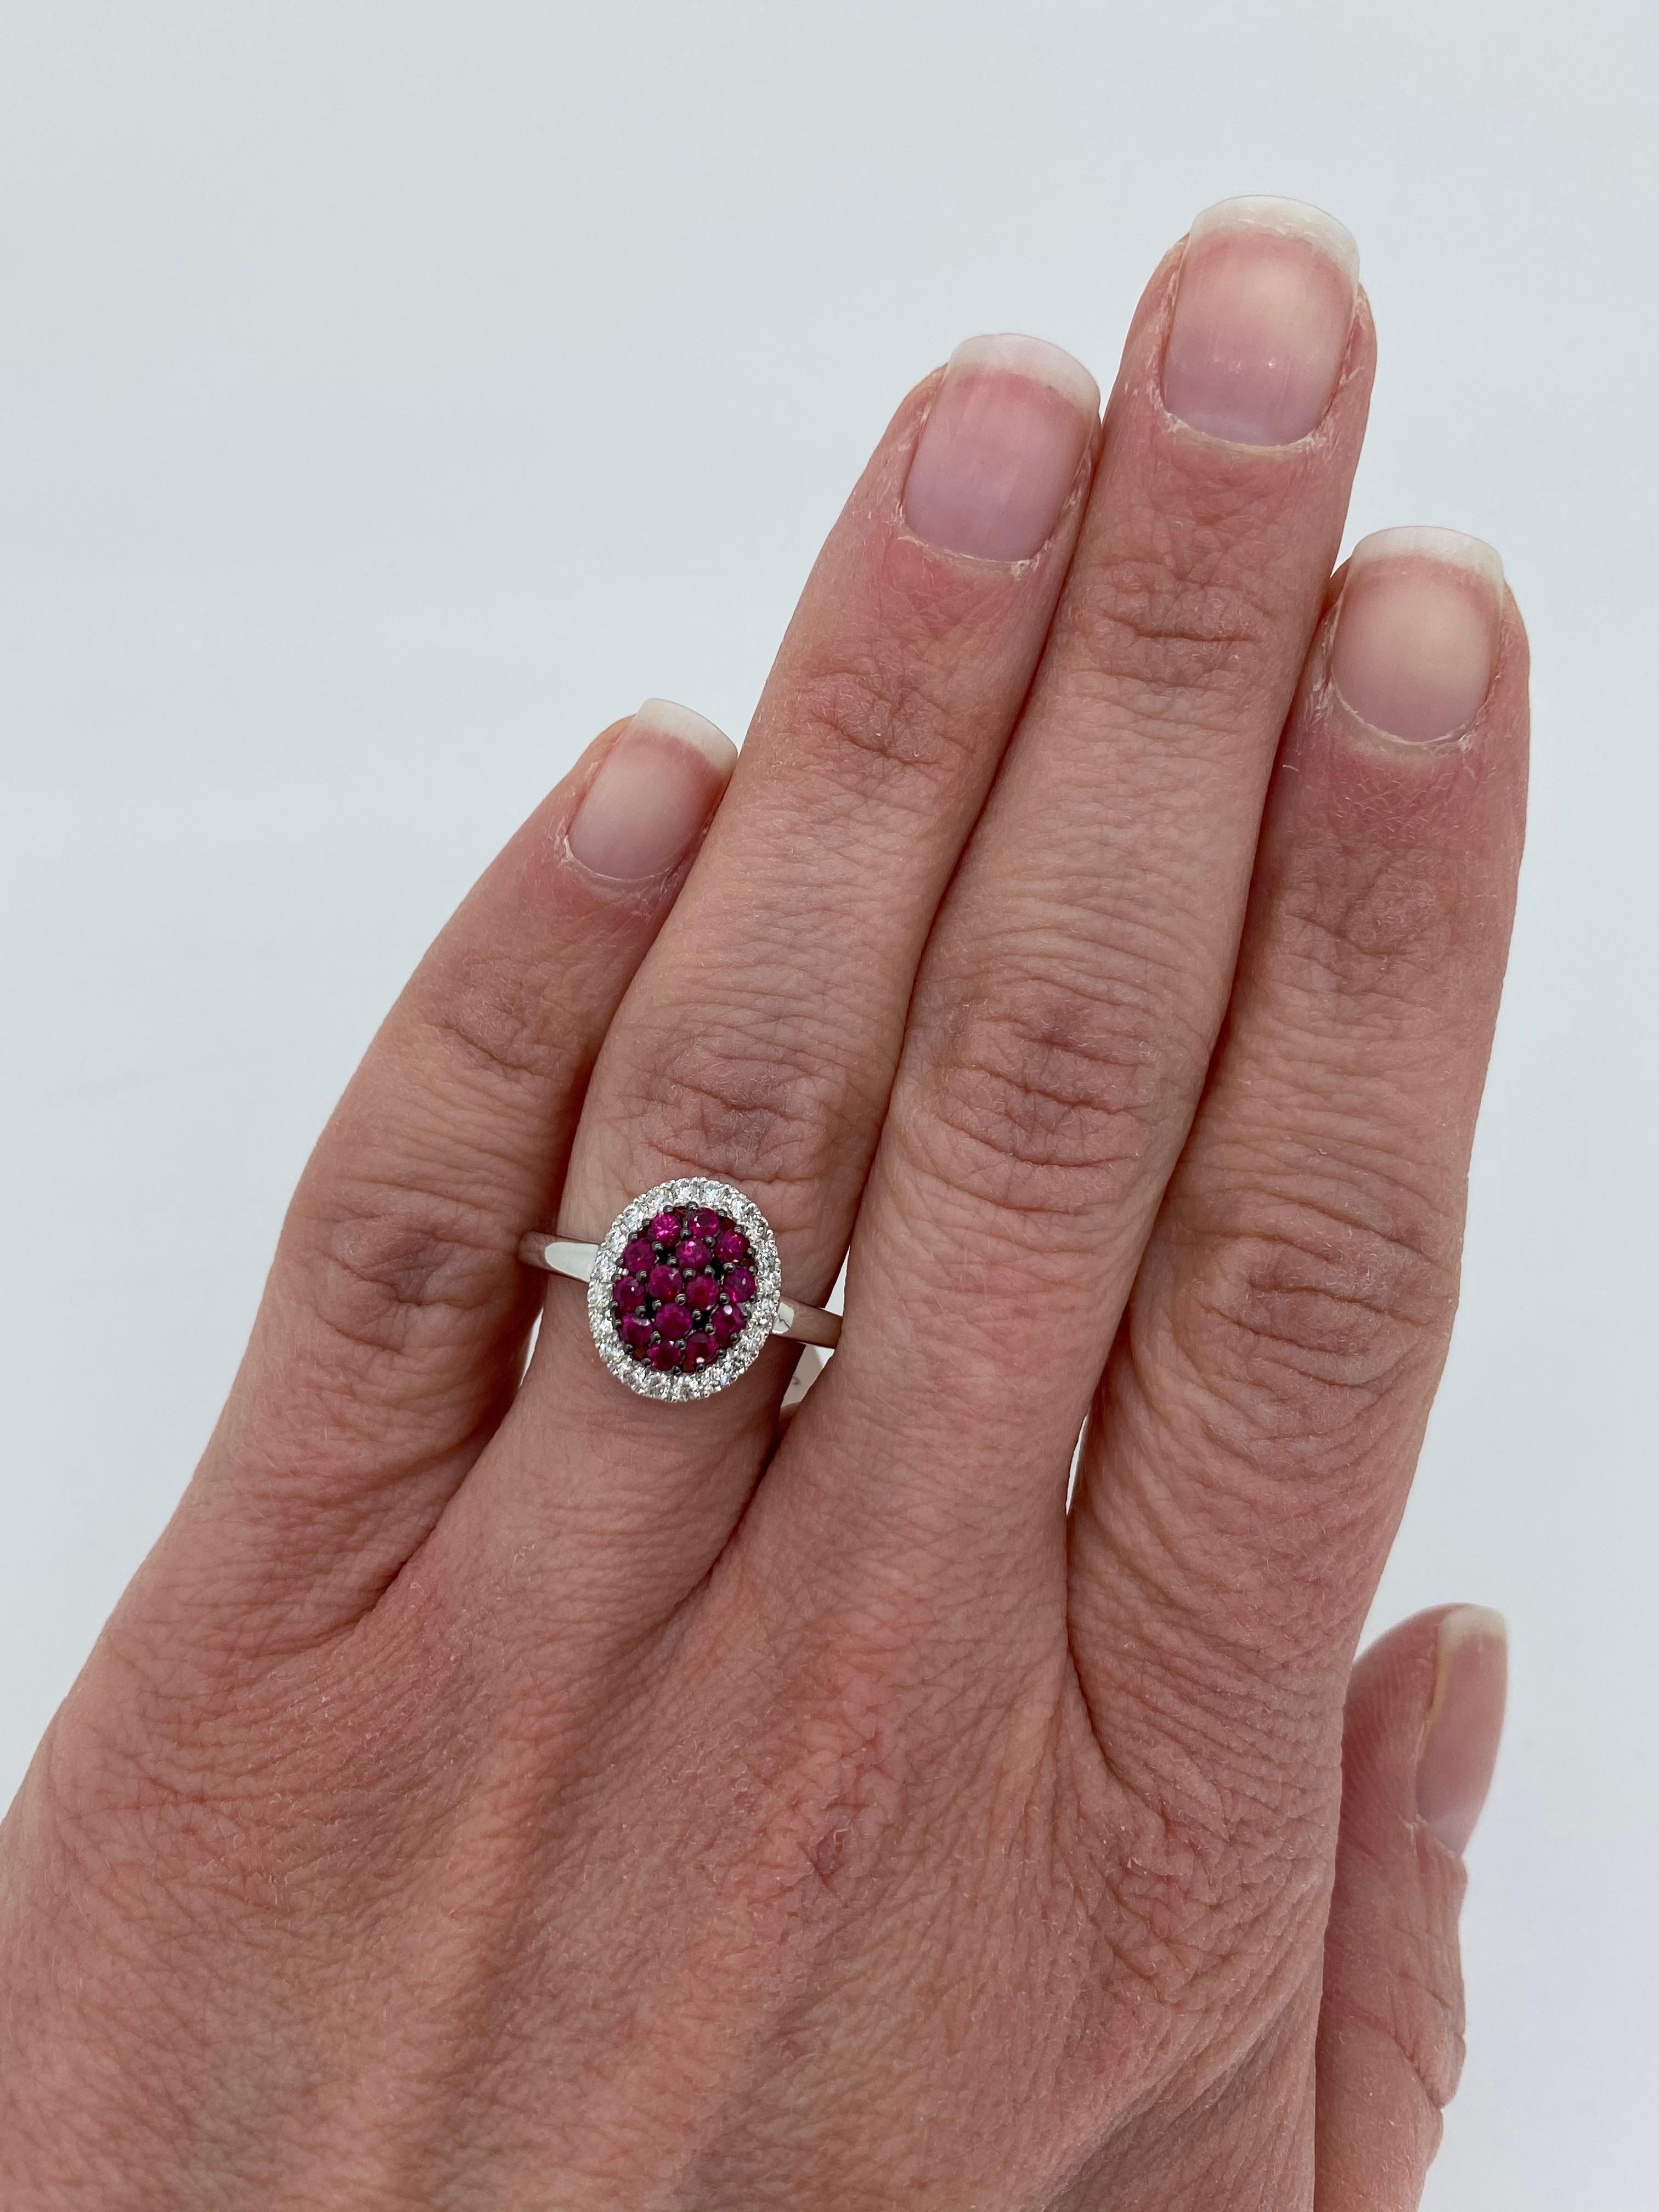 Ruby and diamond cluster ring crafted in 14k white gold with black rhodium accents.

Gemstone: Rubies & Diamonds
Gemstone Carat Weight:  Approximately .50CTW
Diamond Carat Weight:  Approximately .25CTW
Diamond Cut: Round Brilliant Cut
Color: Average